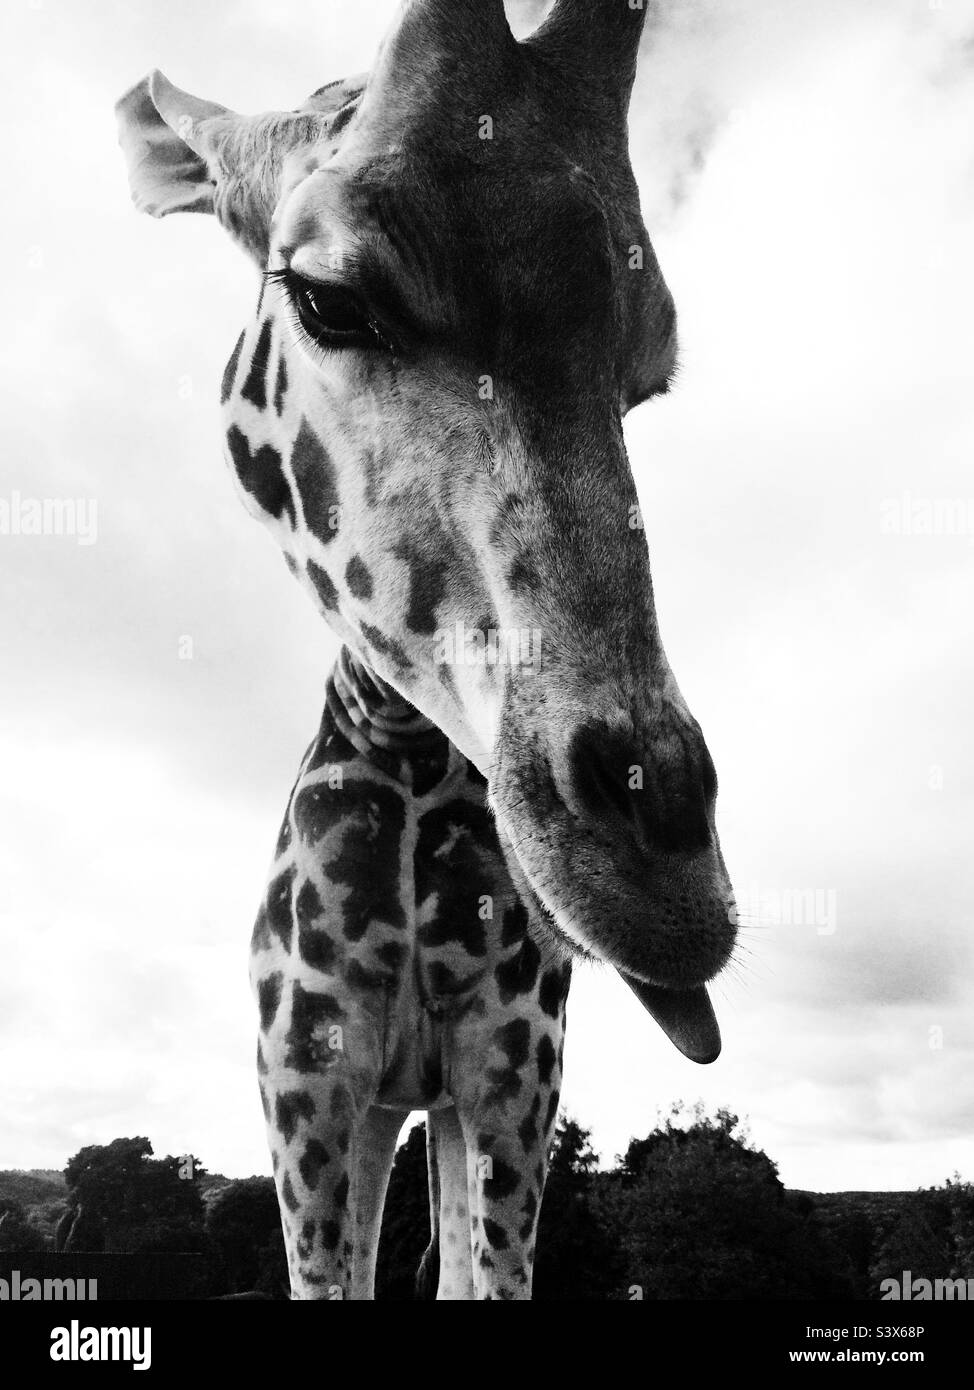 Giraffe with Tongue Out Stock Photo